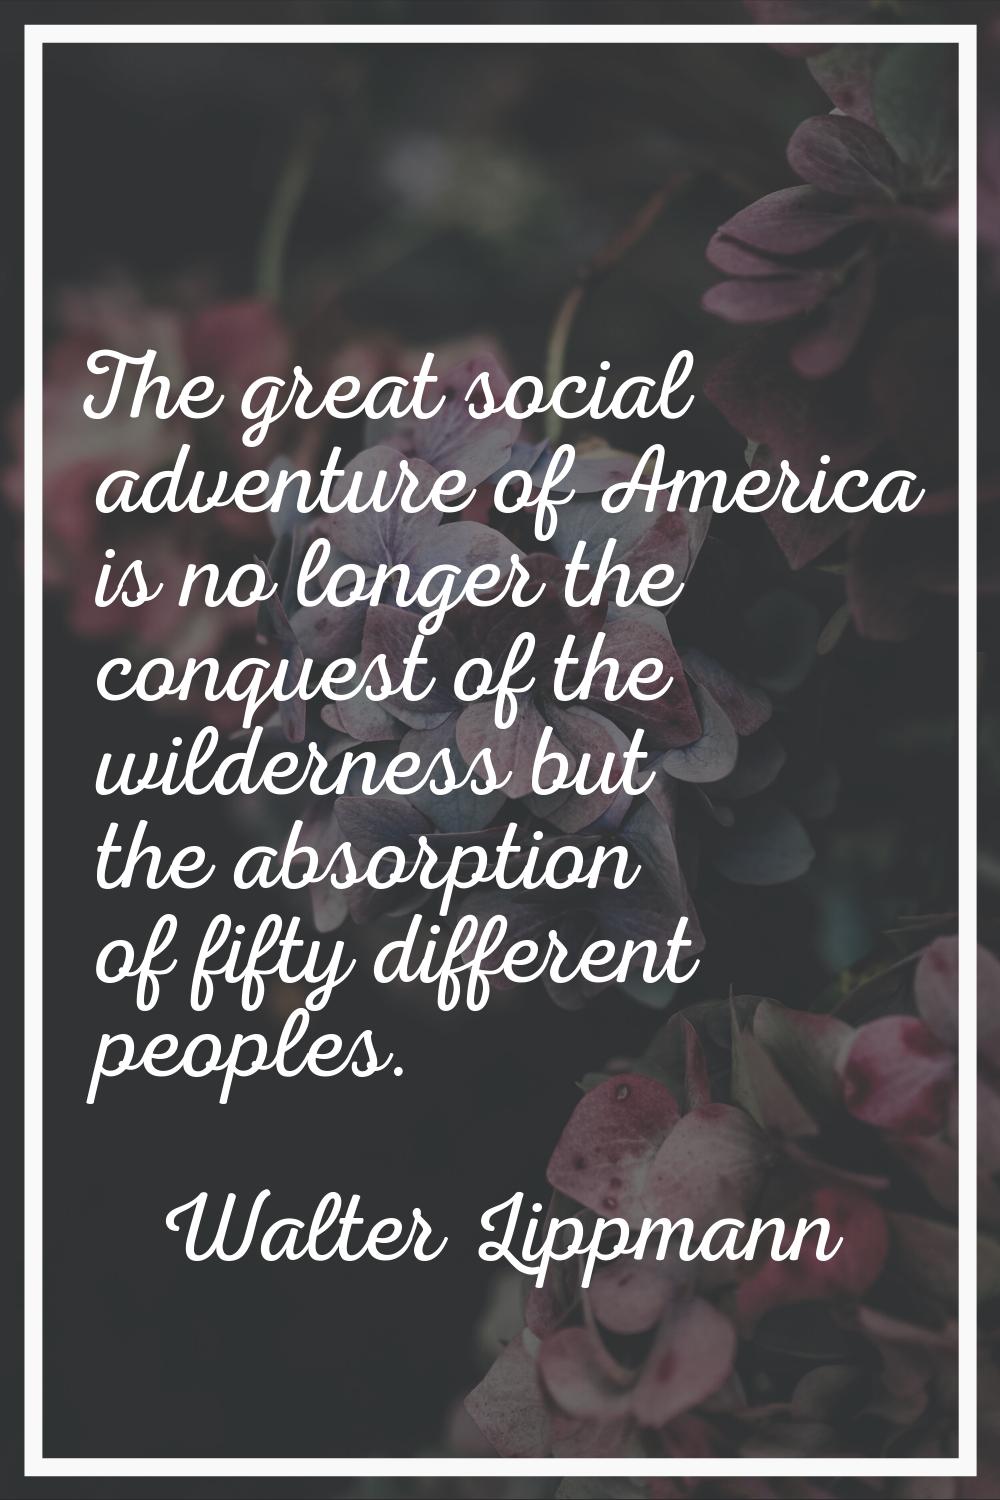 The great social adventure of America is no longer the conquest of the wilderness but the absorptio